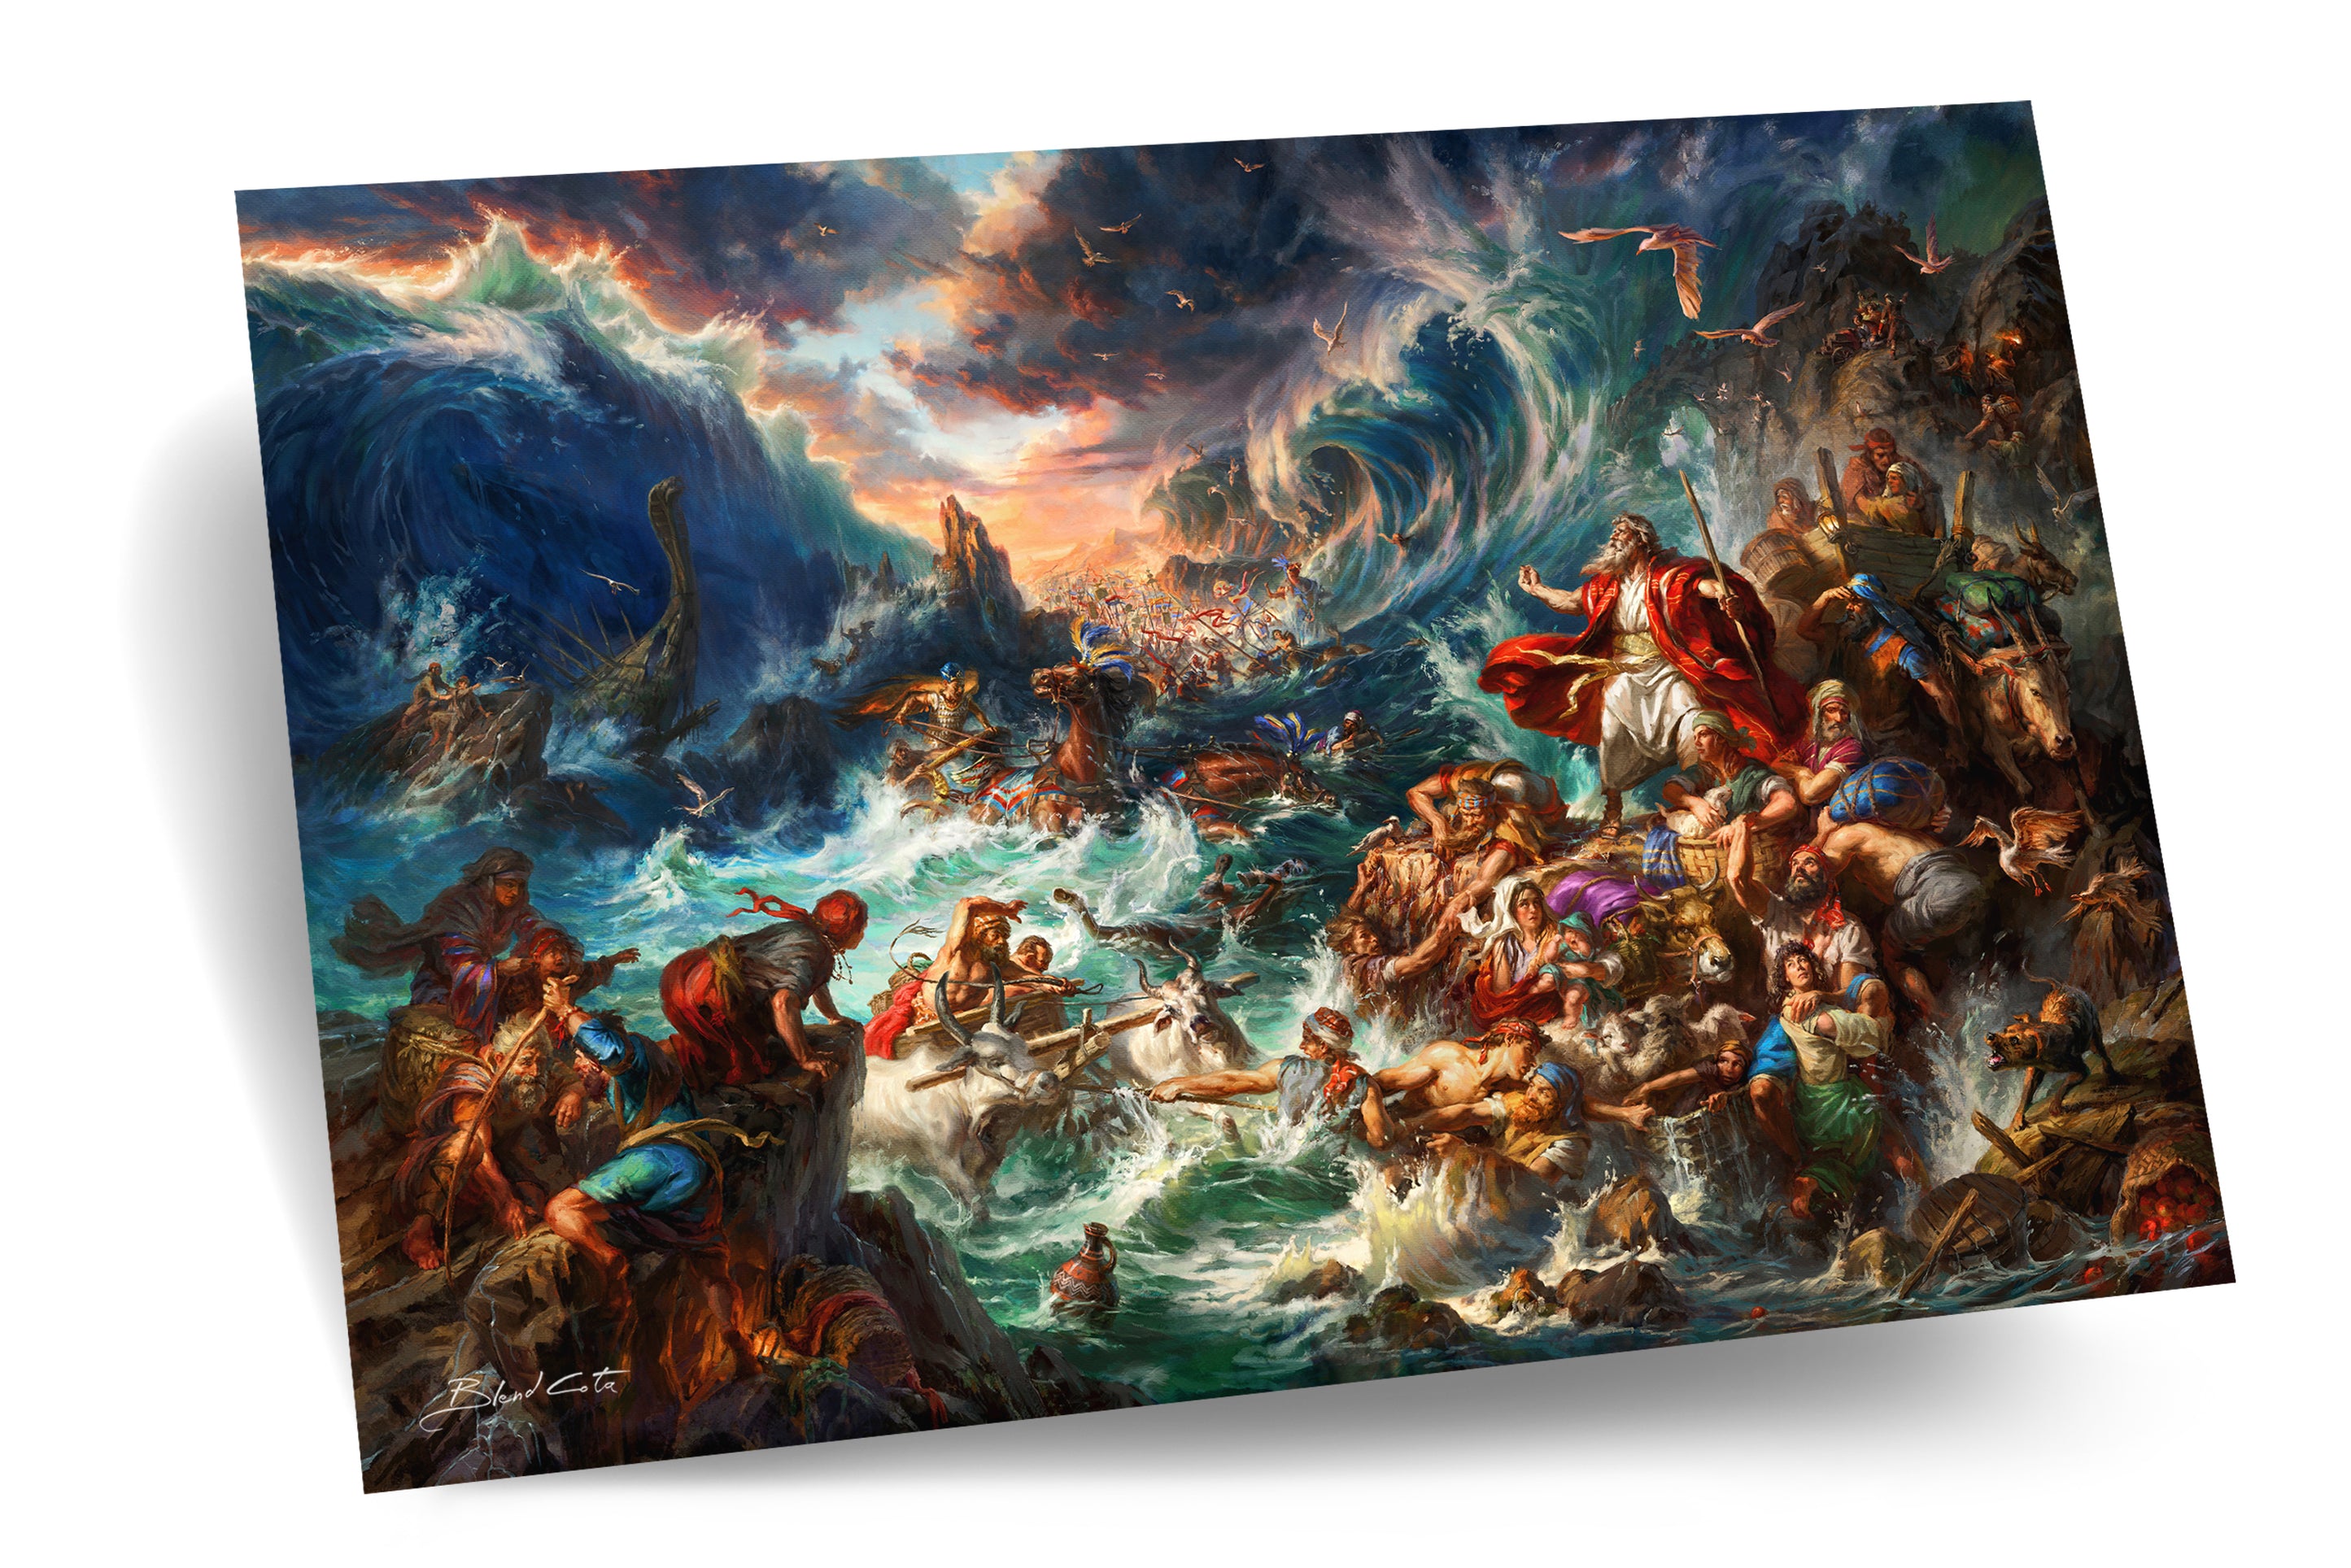 Art print on cardstock of Moses parting and crossing the red sea from the bible story, in a realistic style.